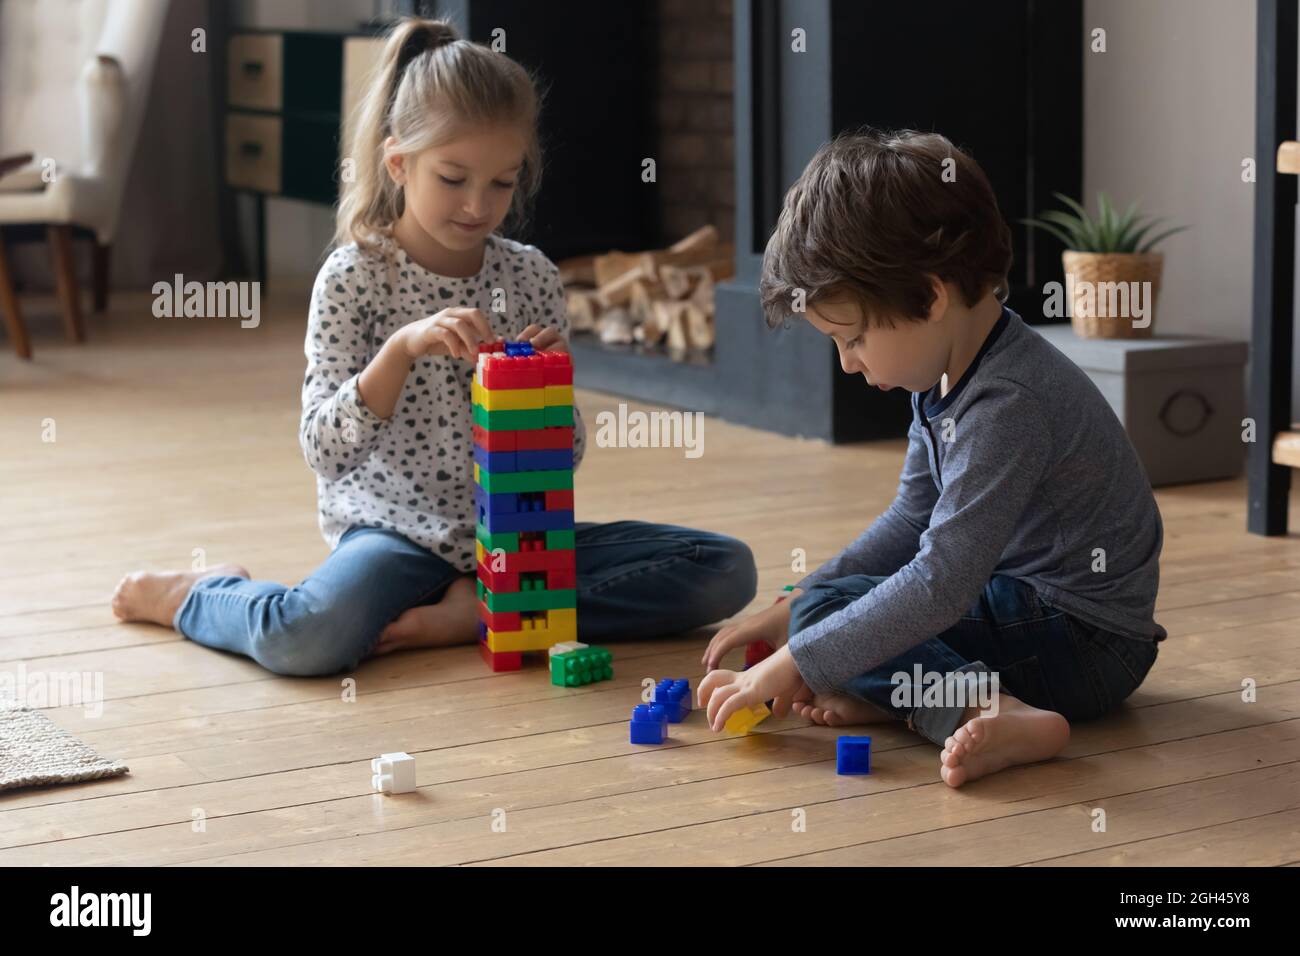 Two sibling children completing tower model form plastic building blocks Stock Photo